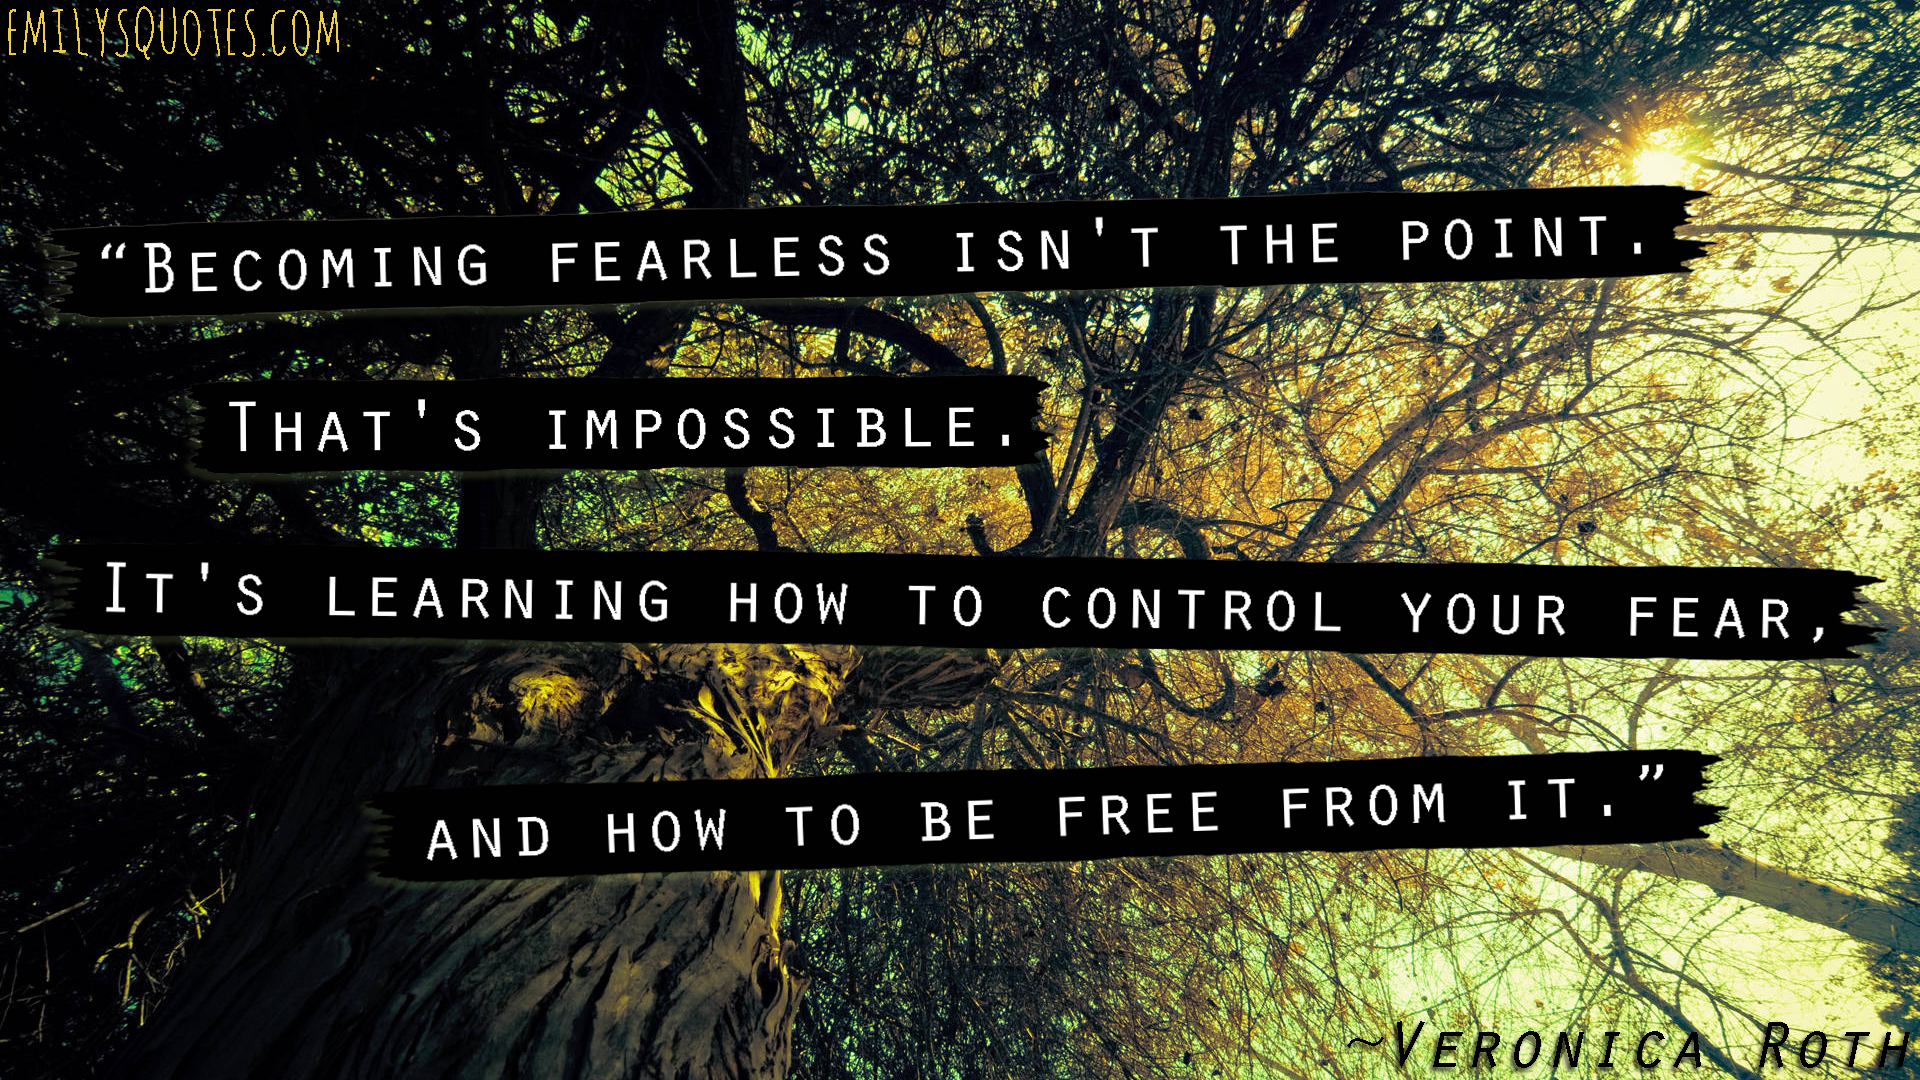 Becoming fearless isn’t the point. That’s impossible. It’s learning how to control your fear, and how to be free from it